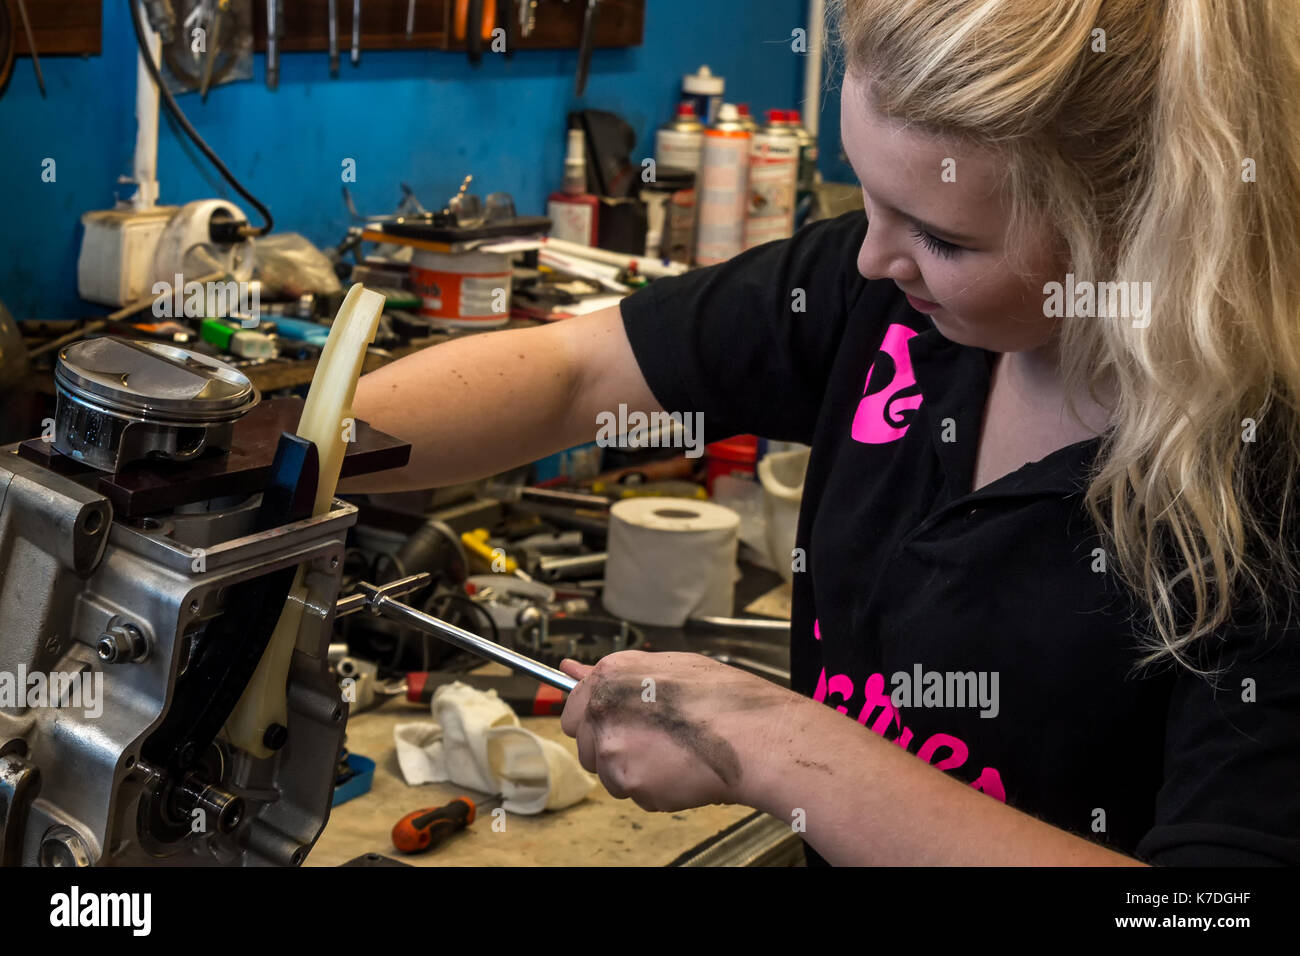 Young woman breaks stereotypes - doing male job at mechanical workshop. Repairing motorcycle engine Stock Photo